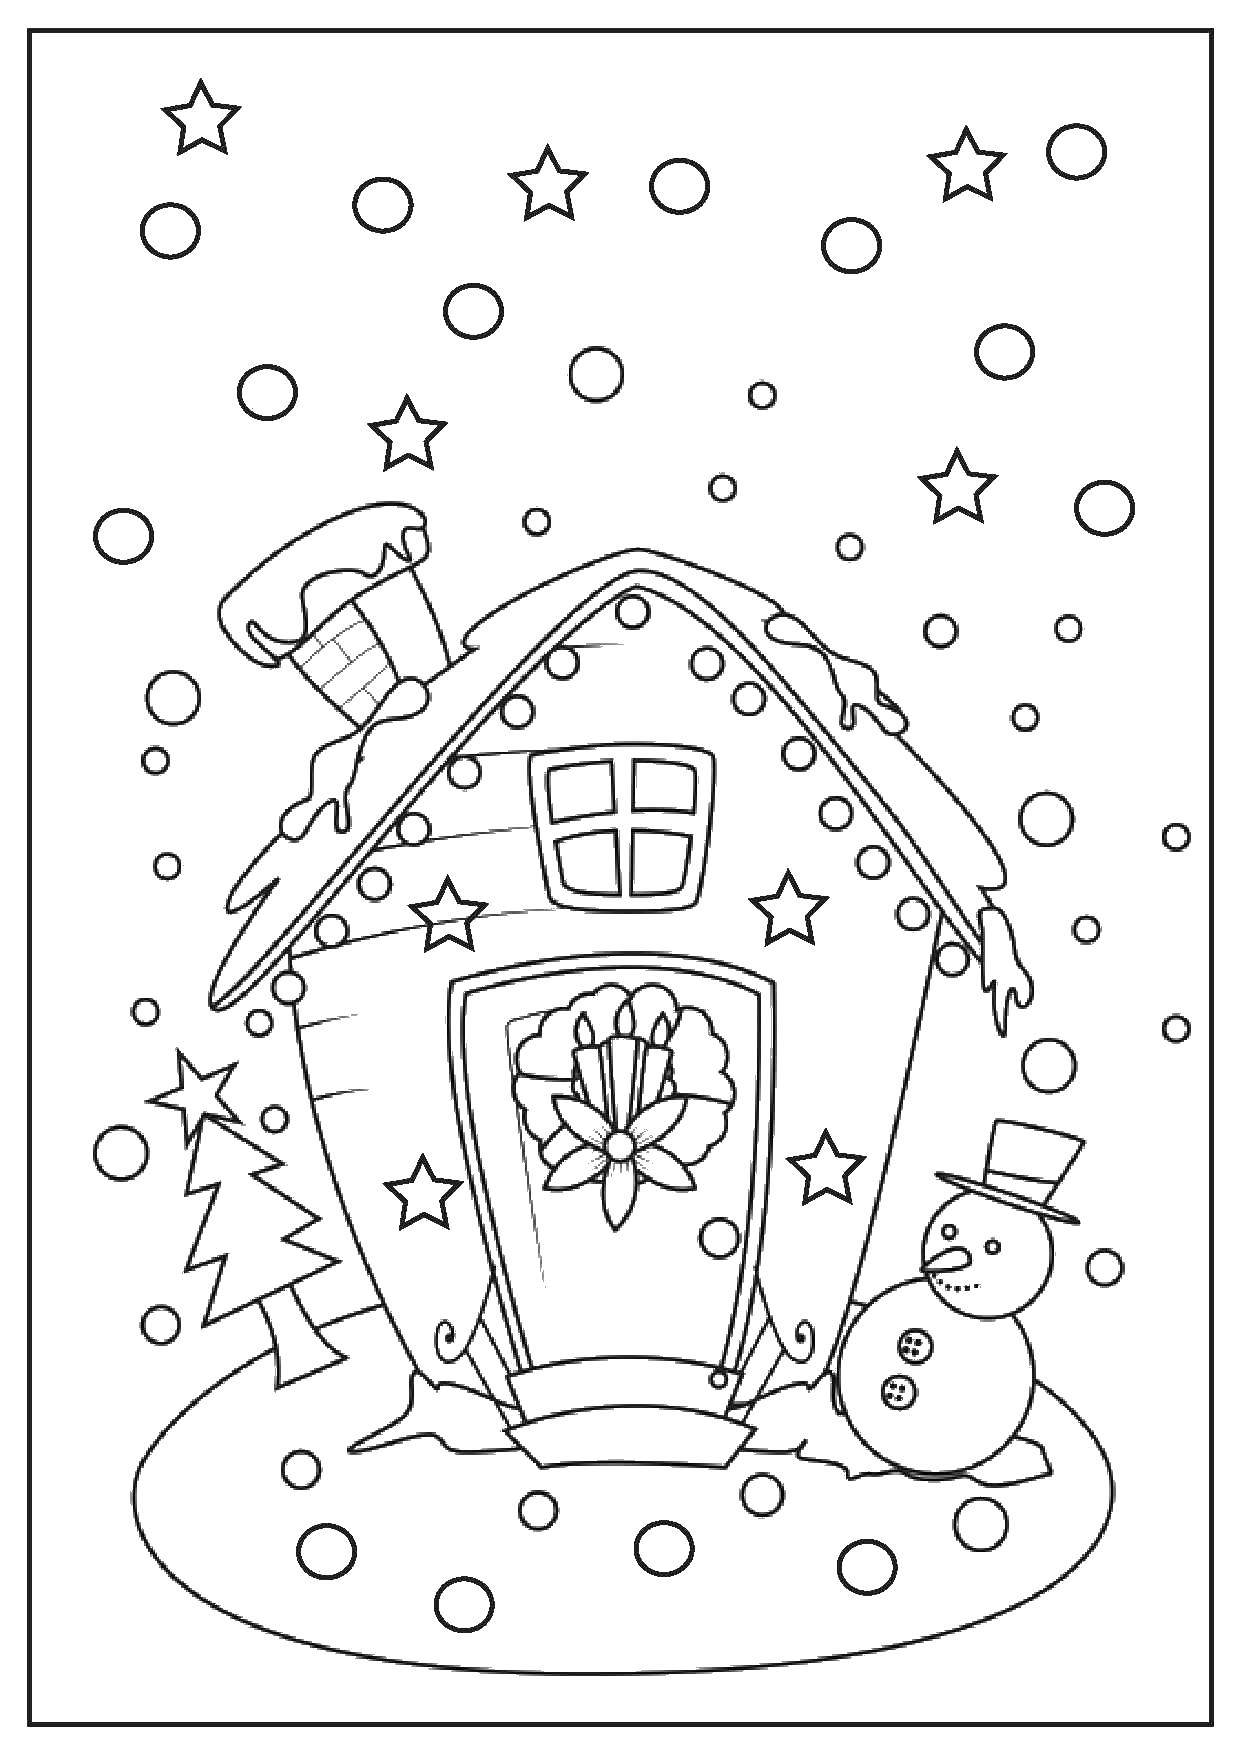 Coloring Winter house. Category winter. Tags:  Winter, house, snow.